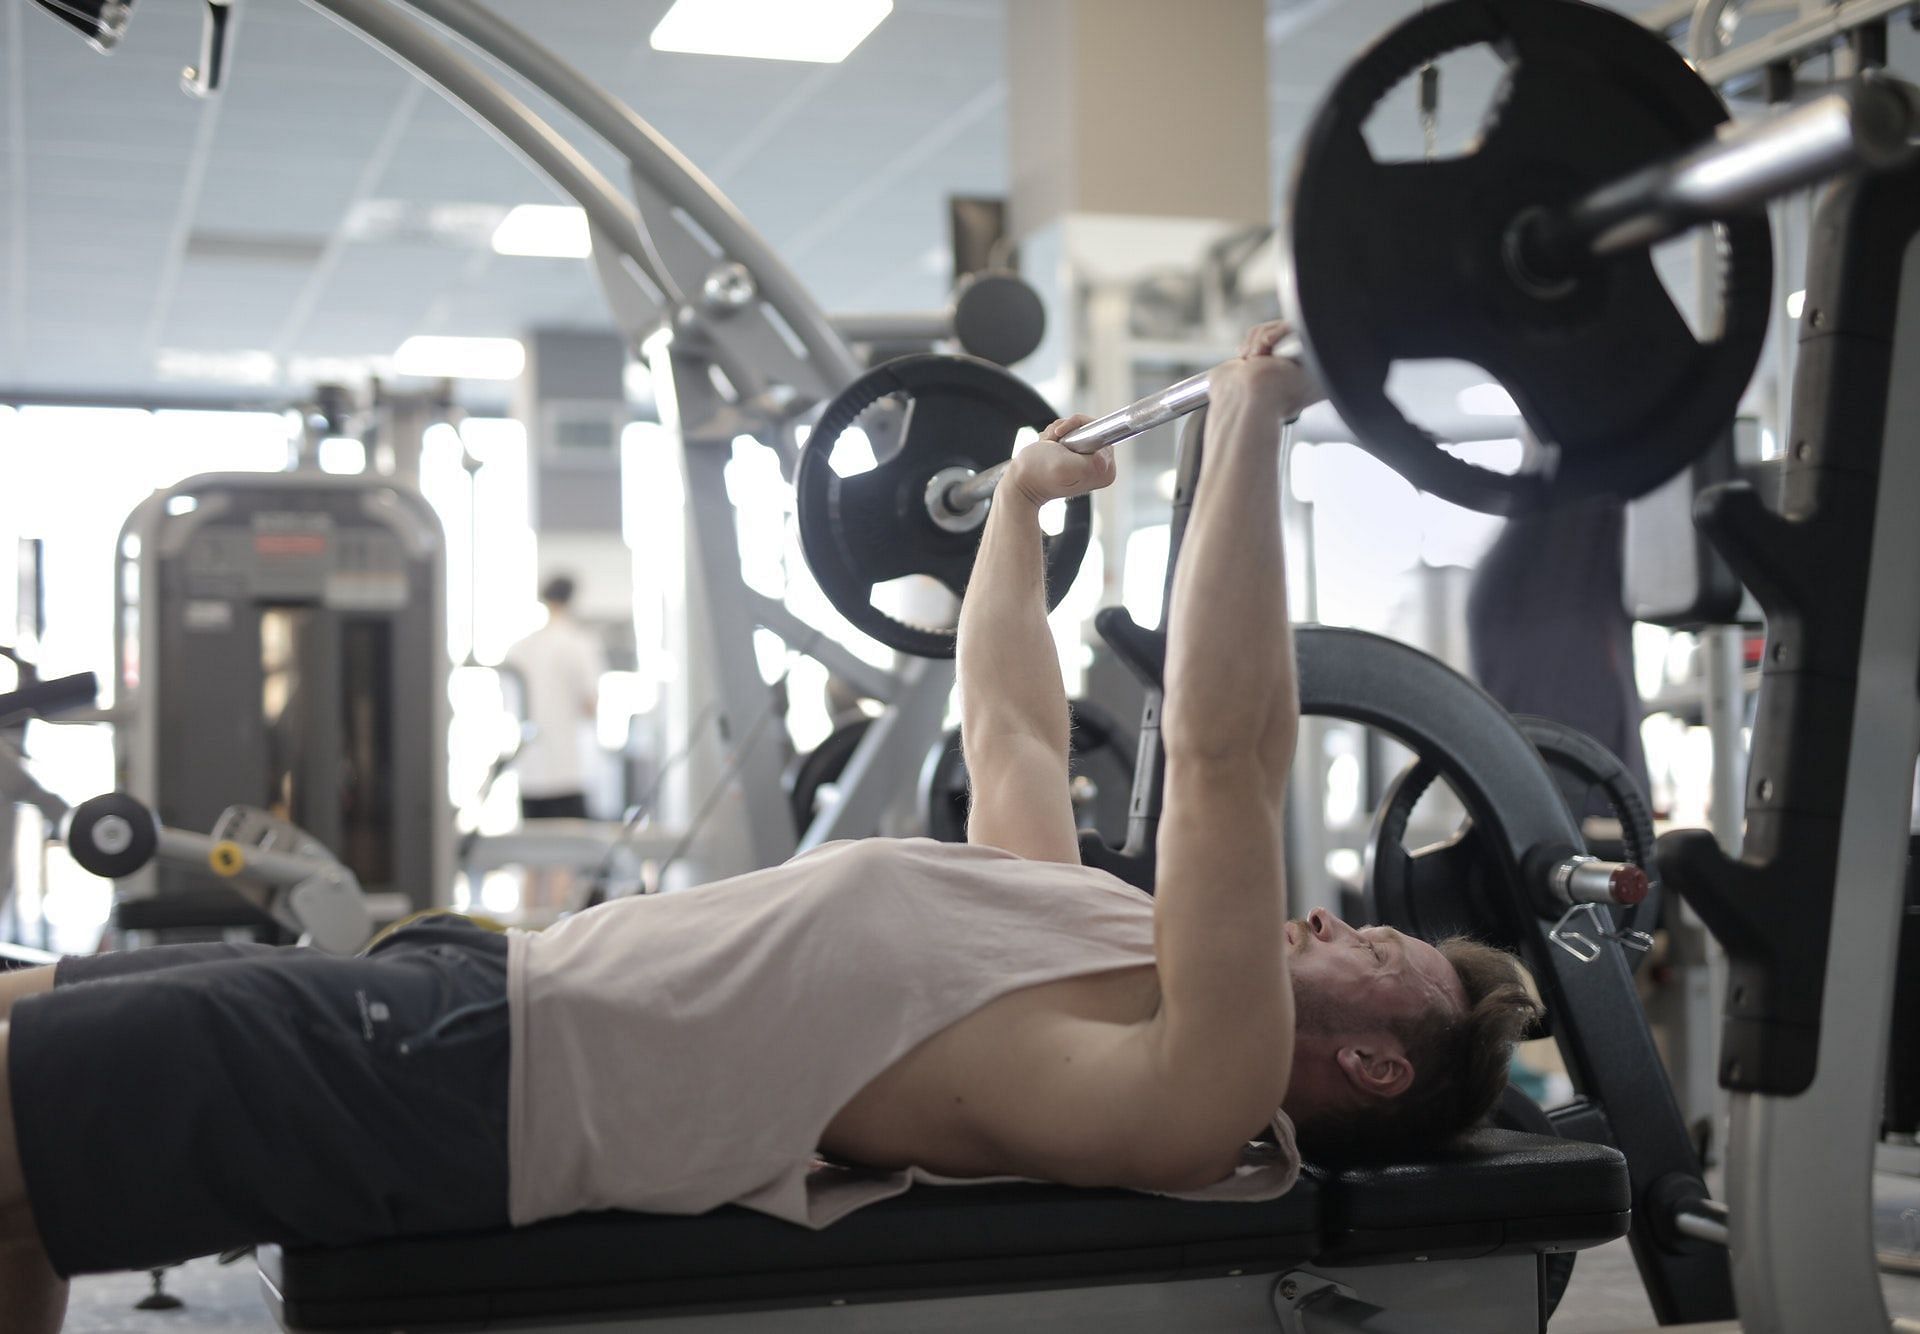 Guide to the best chest exercises using the bench press. (Image via Pexels/Photo by Andrea Piacquadio)